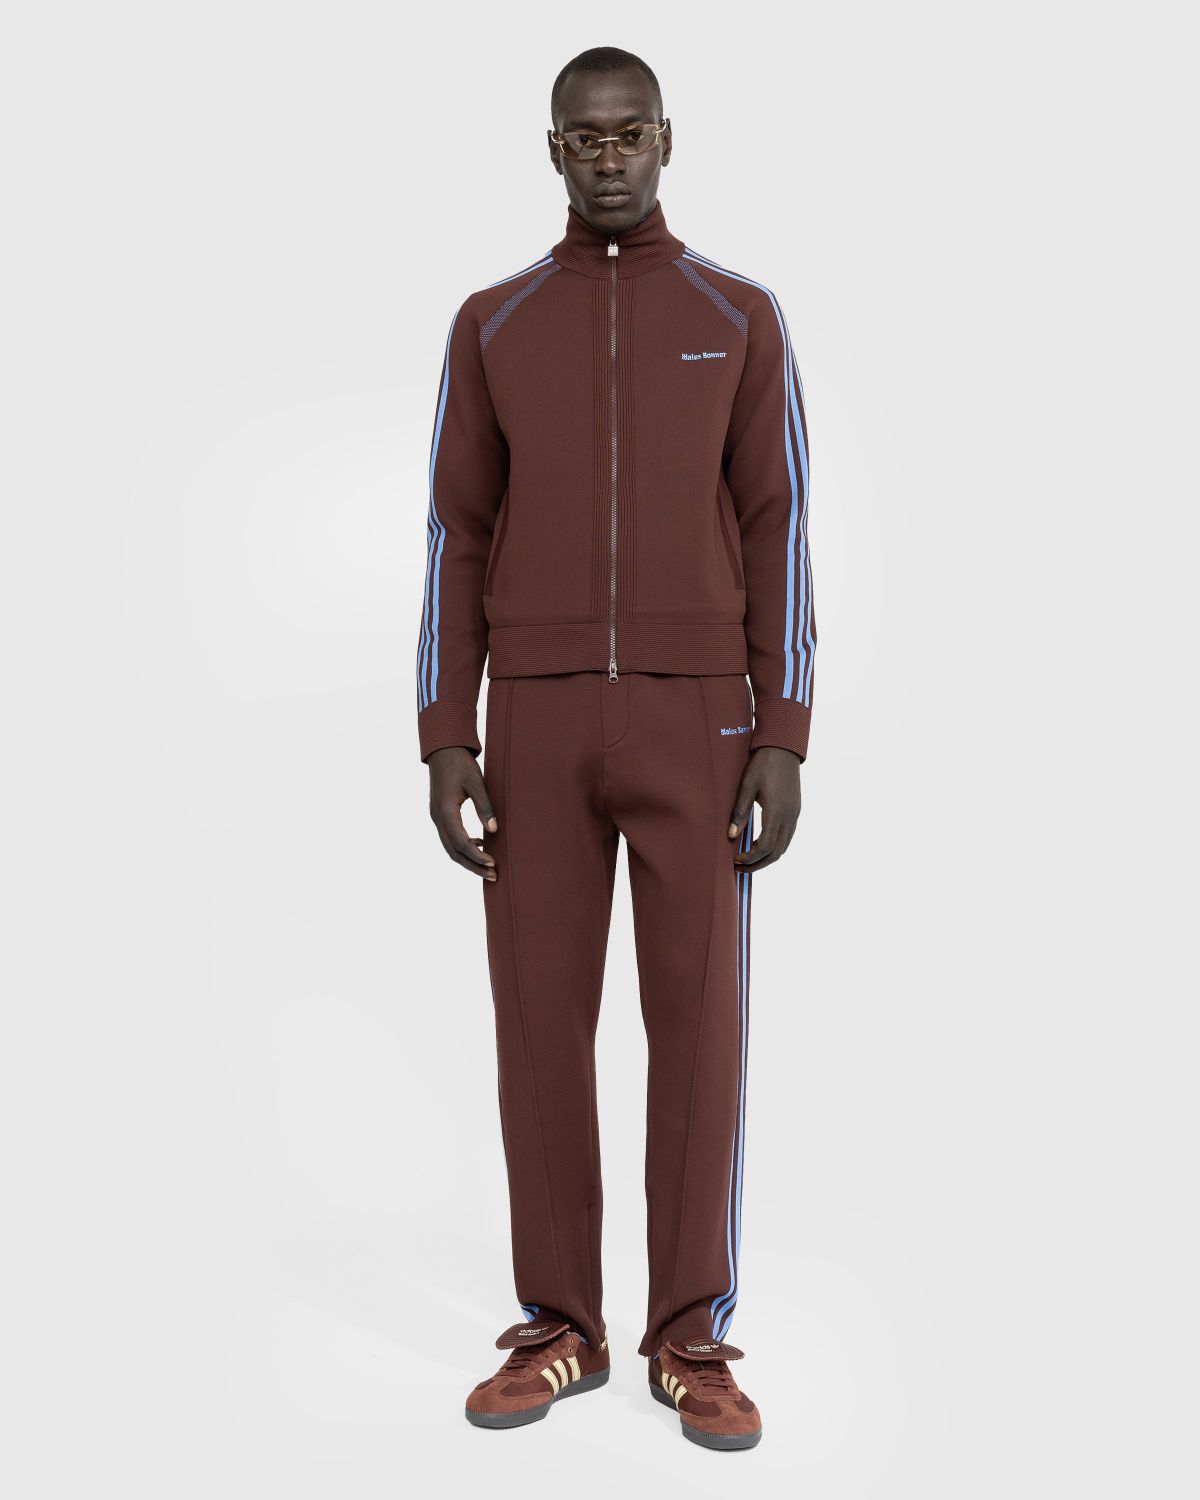 Adidas x Wales Bonner – Knit Track Top Mystery Brown - Tops - Brown - Image 3